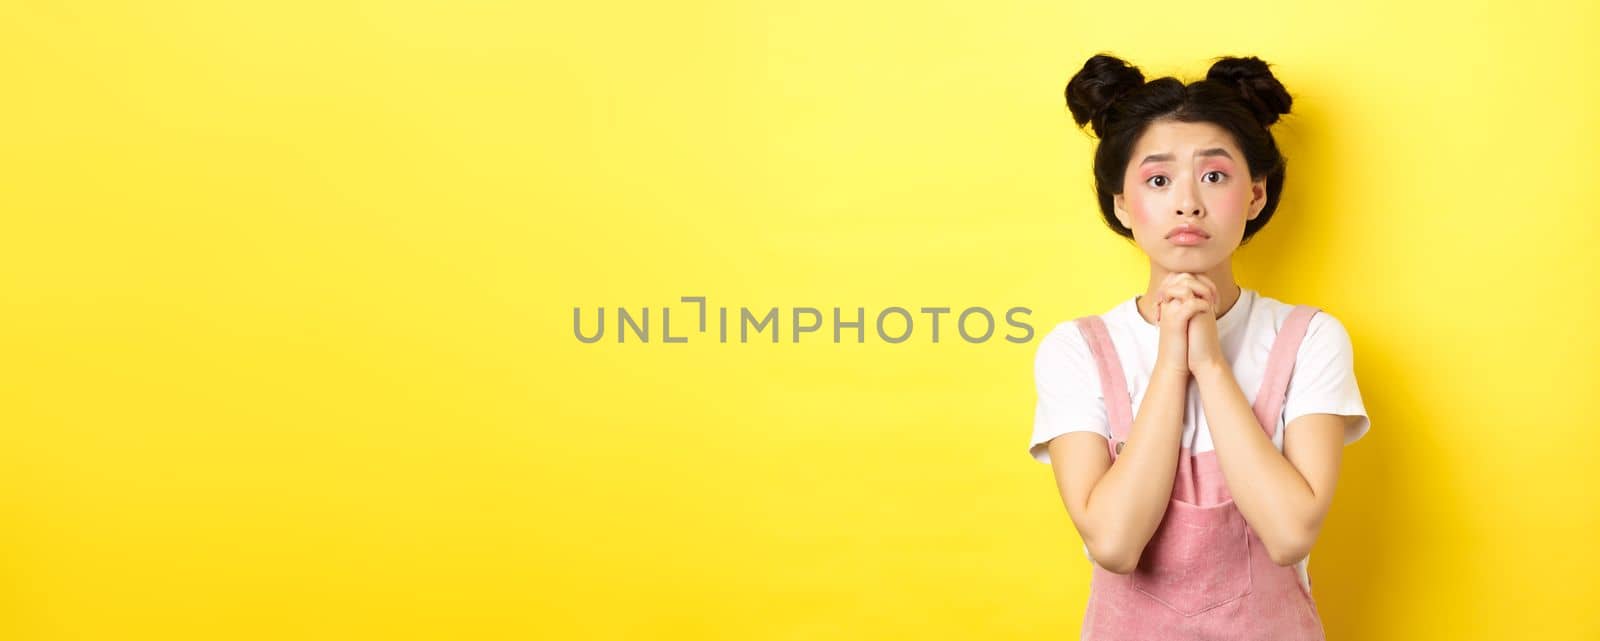 Hopeful asian stylish girl holding hands in begging sign, waiting with hope, asking for favour or help, standing on yellow background.